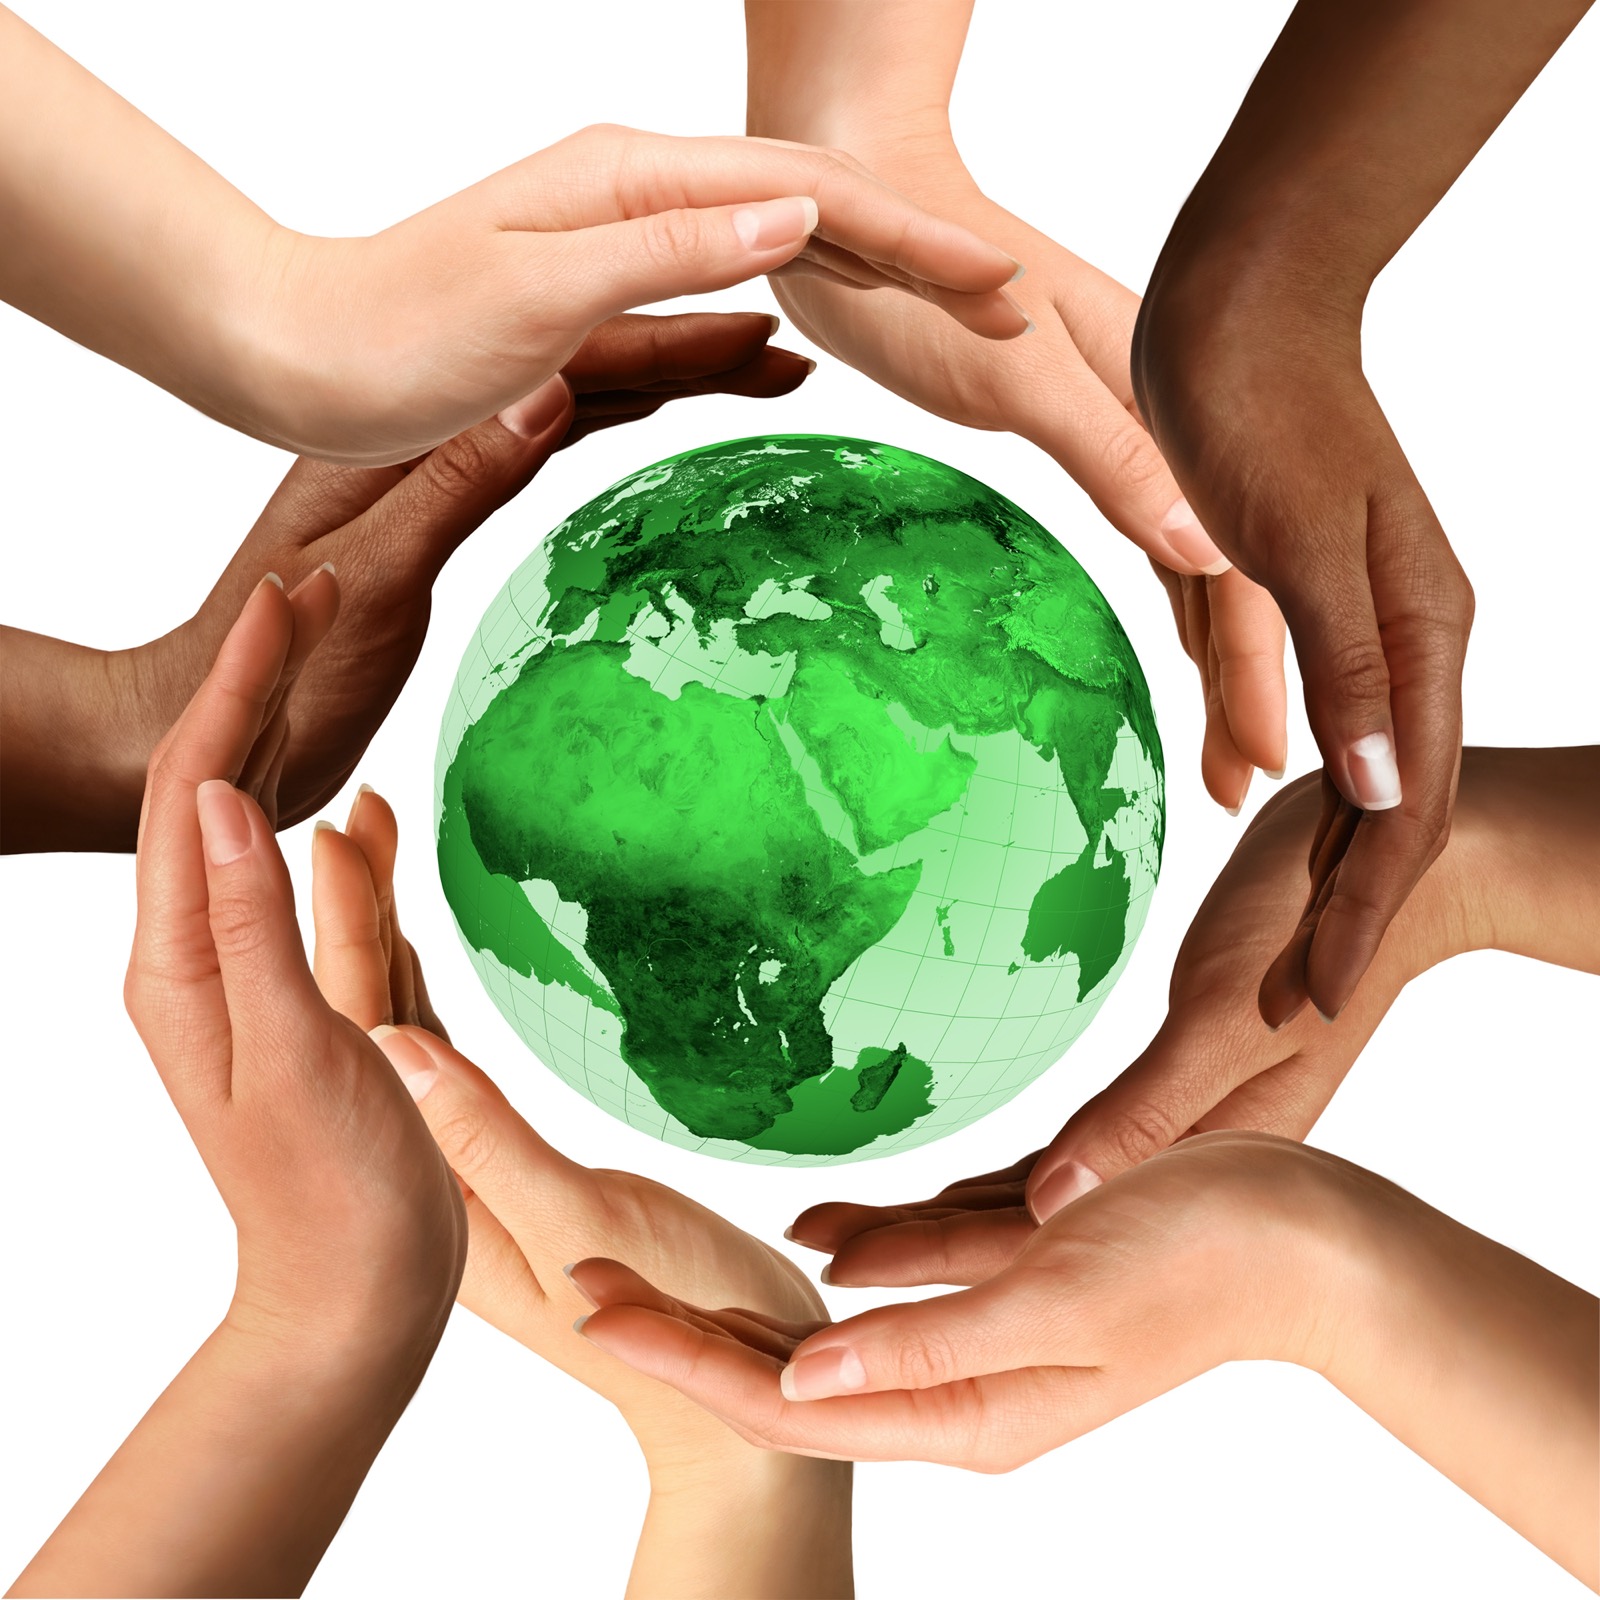 Multiracial Hands Around the Earth Globe